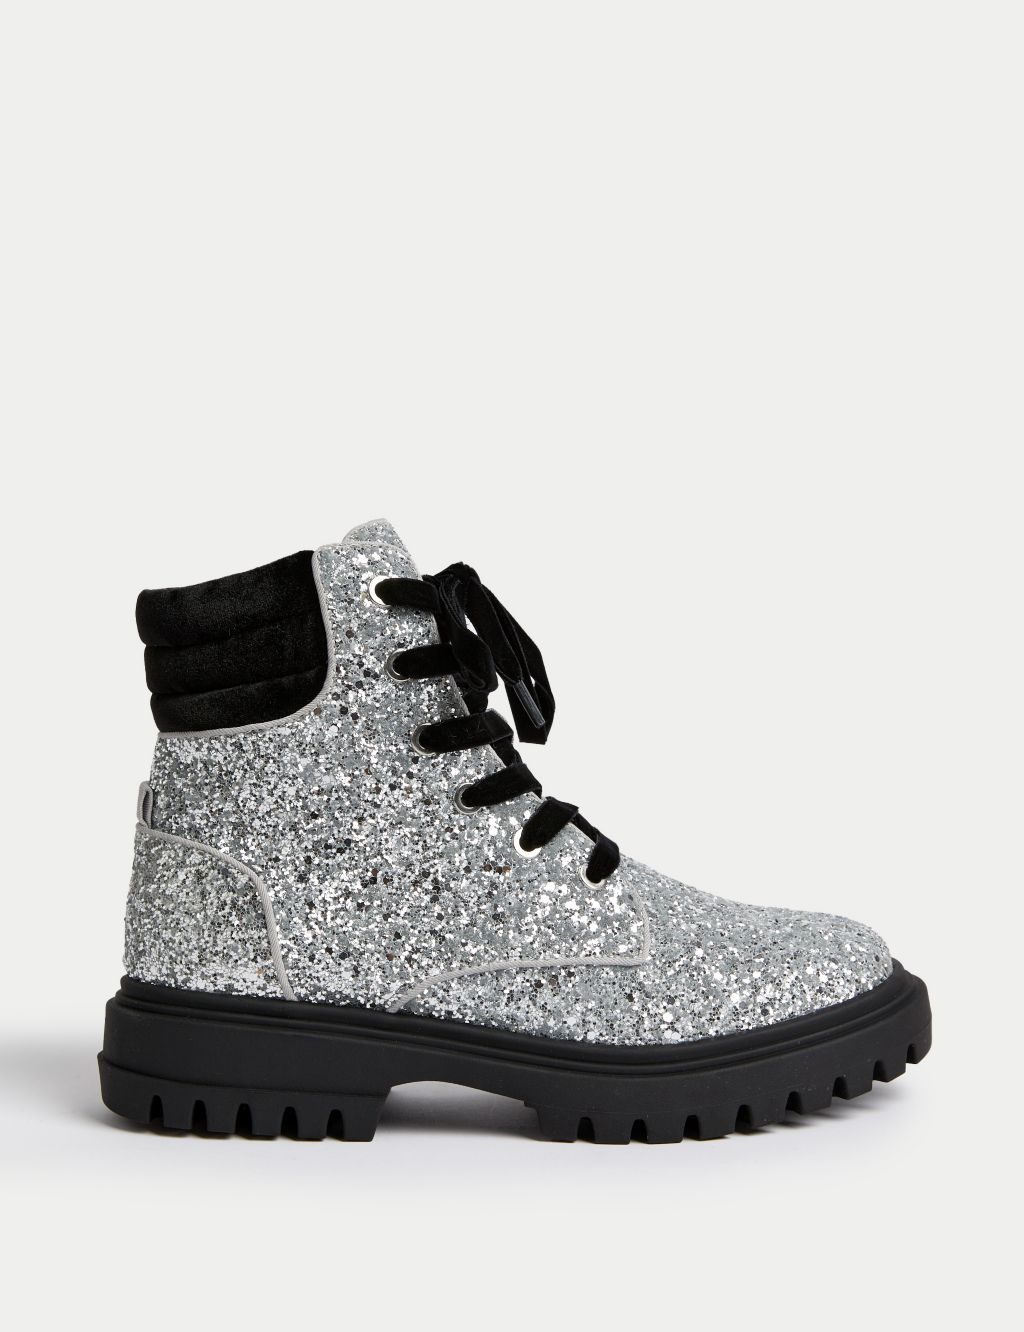 Kids' Glitter Snow Boots (13 Small - 6 Large) image 1